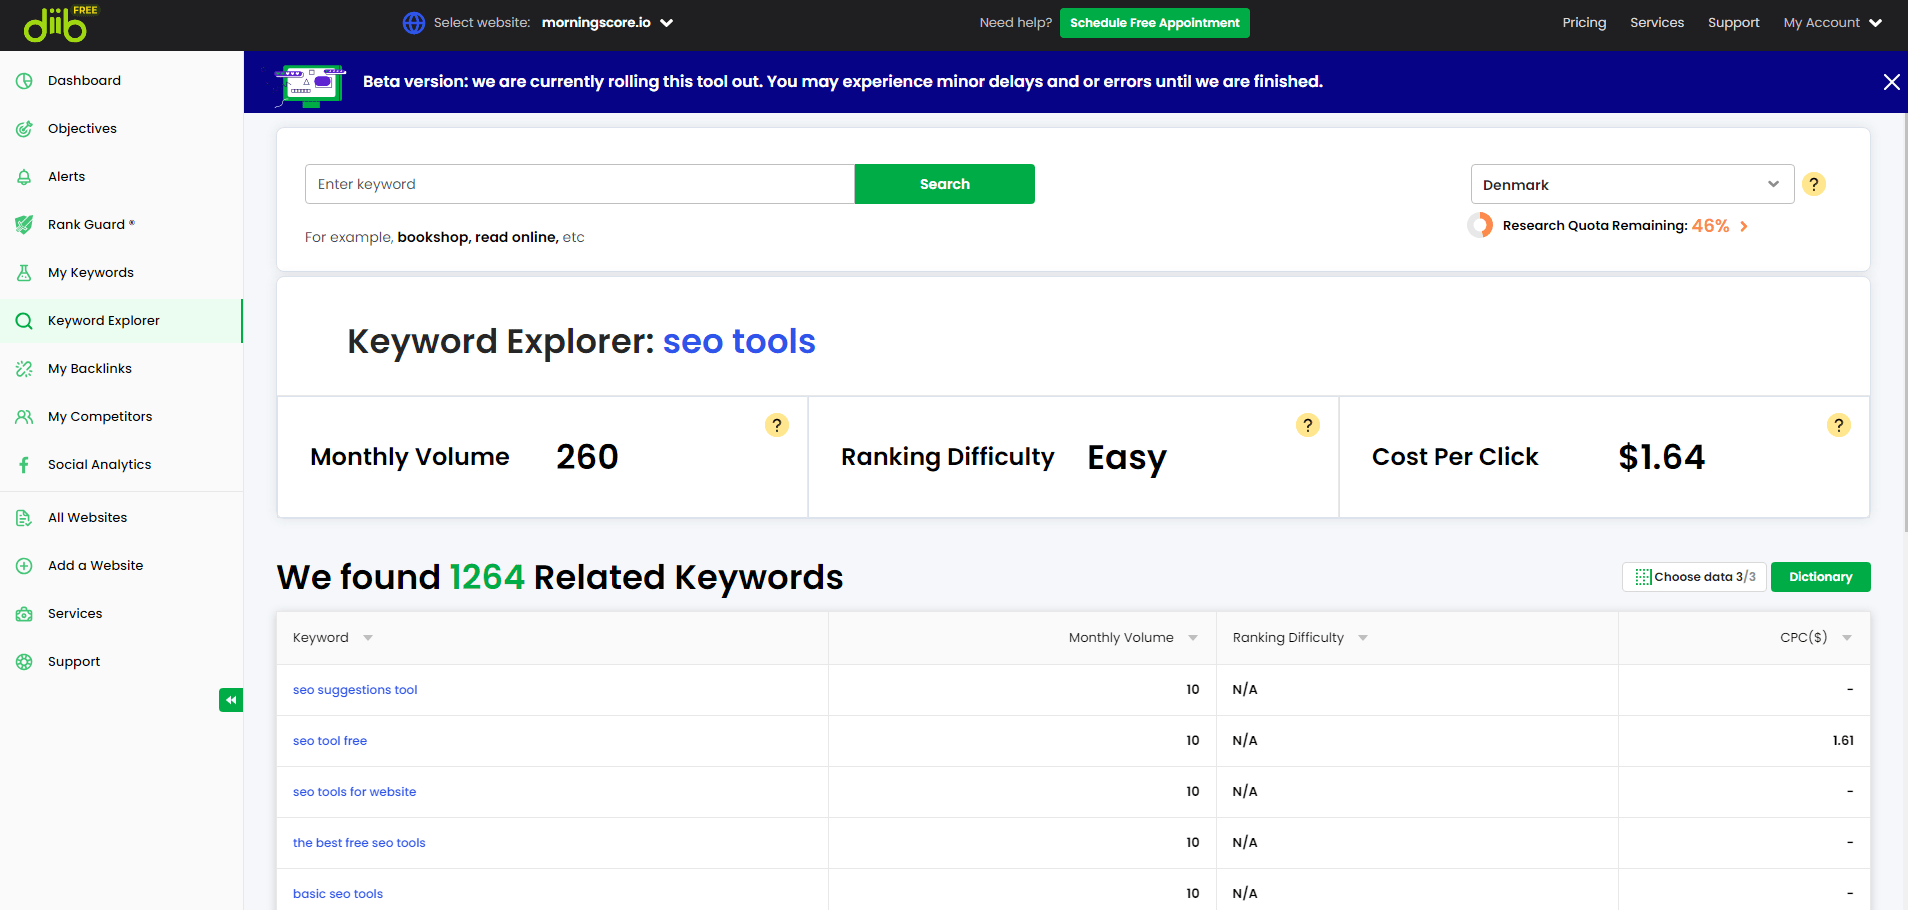 diib is a good tool for finding new keywords